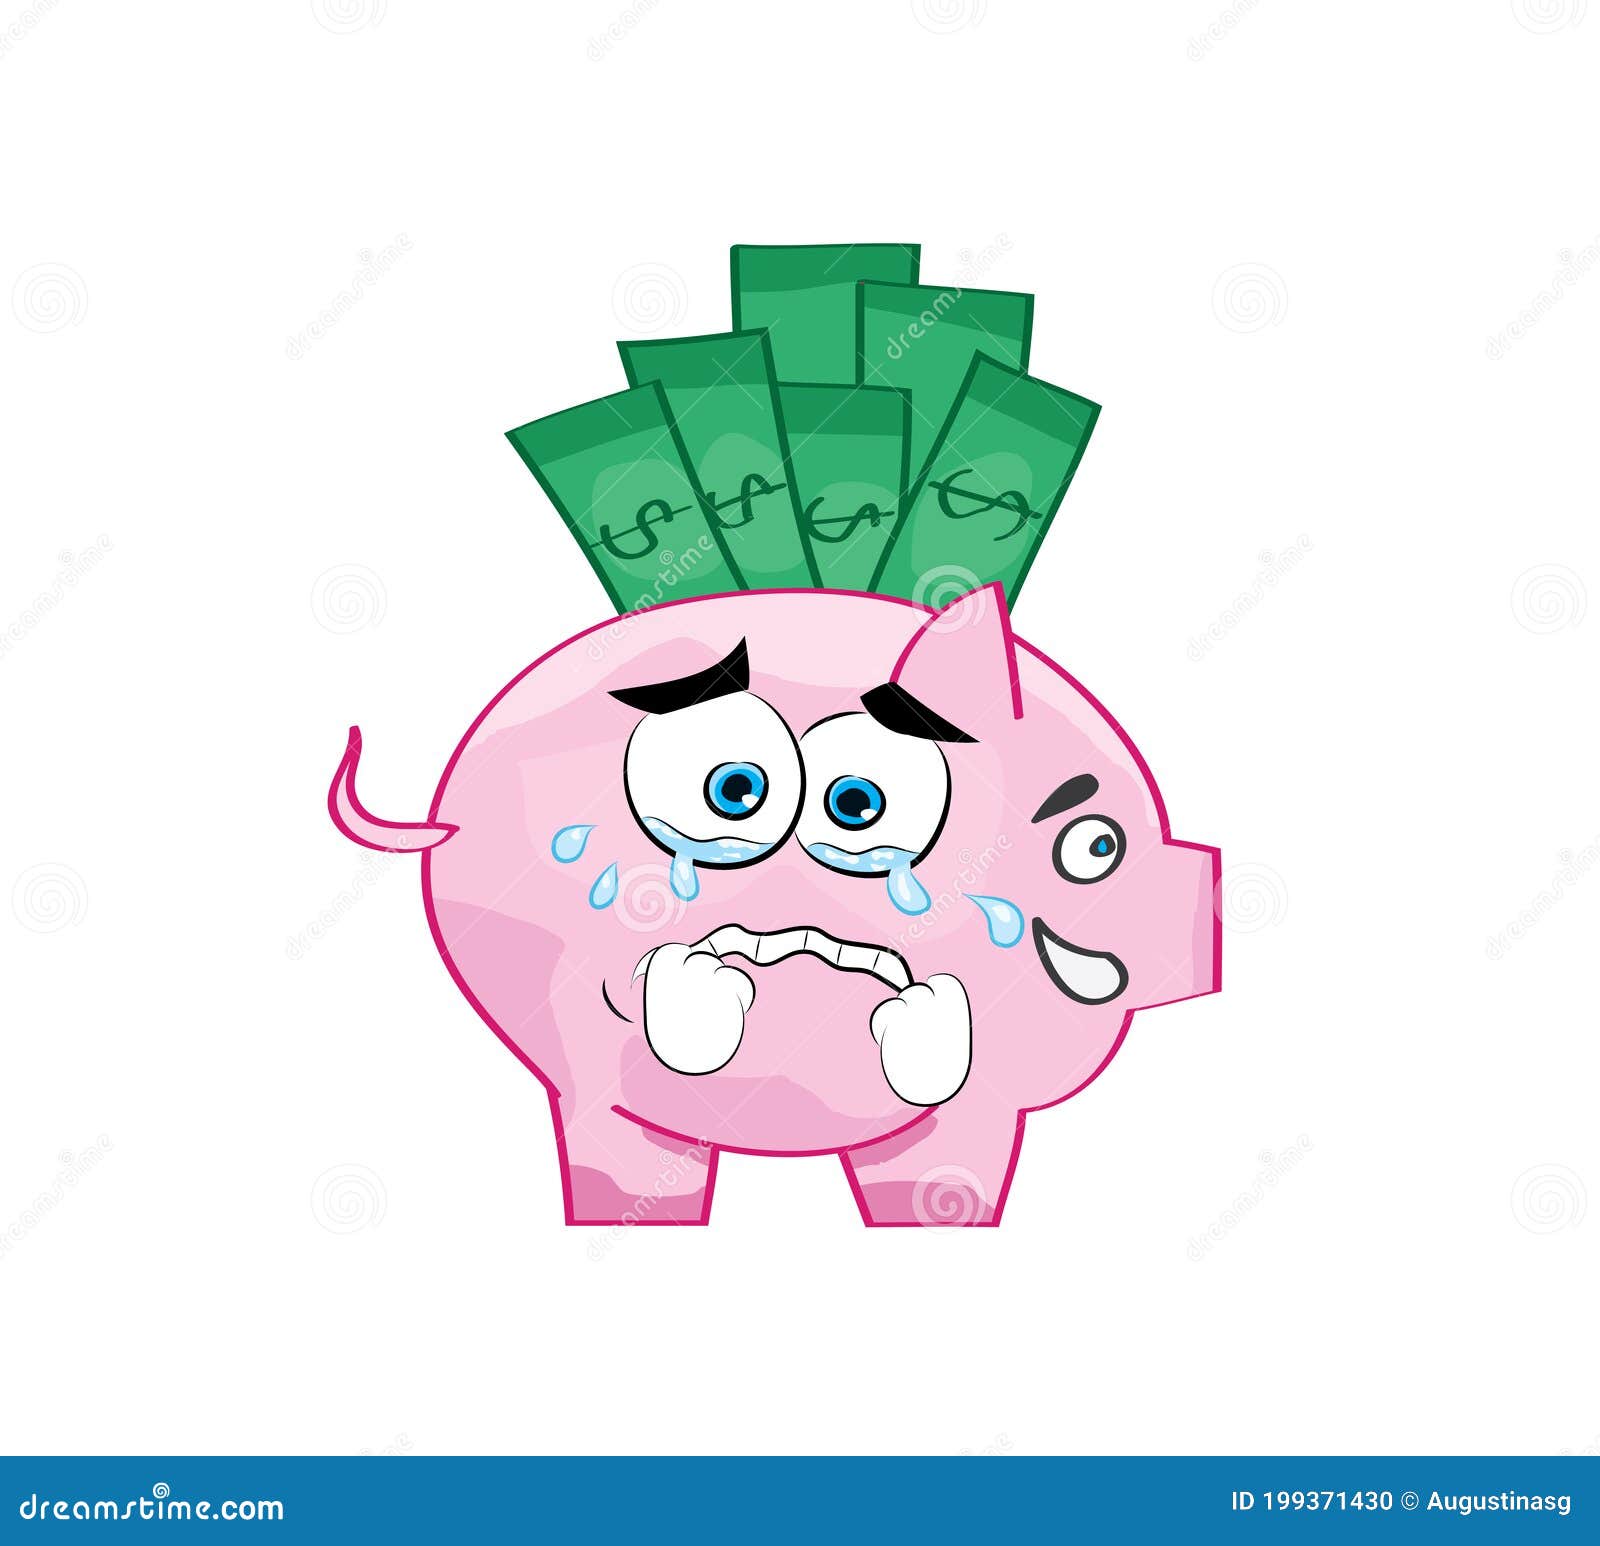 Crying Cartoon Illustration of Savings Account Pig. Money Savings Stock  Illustration - Illustration of hands, white: 199371430